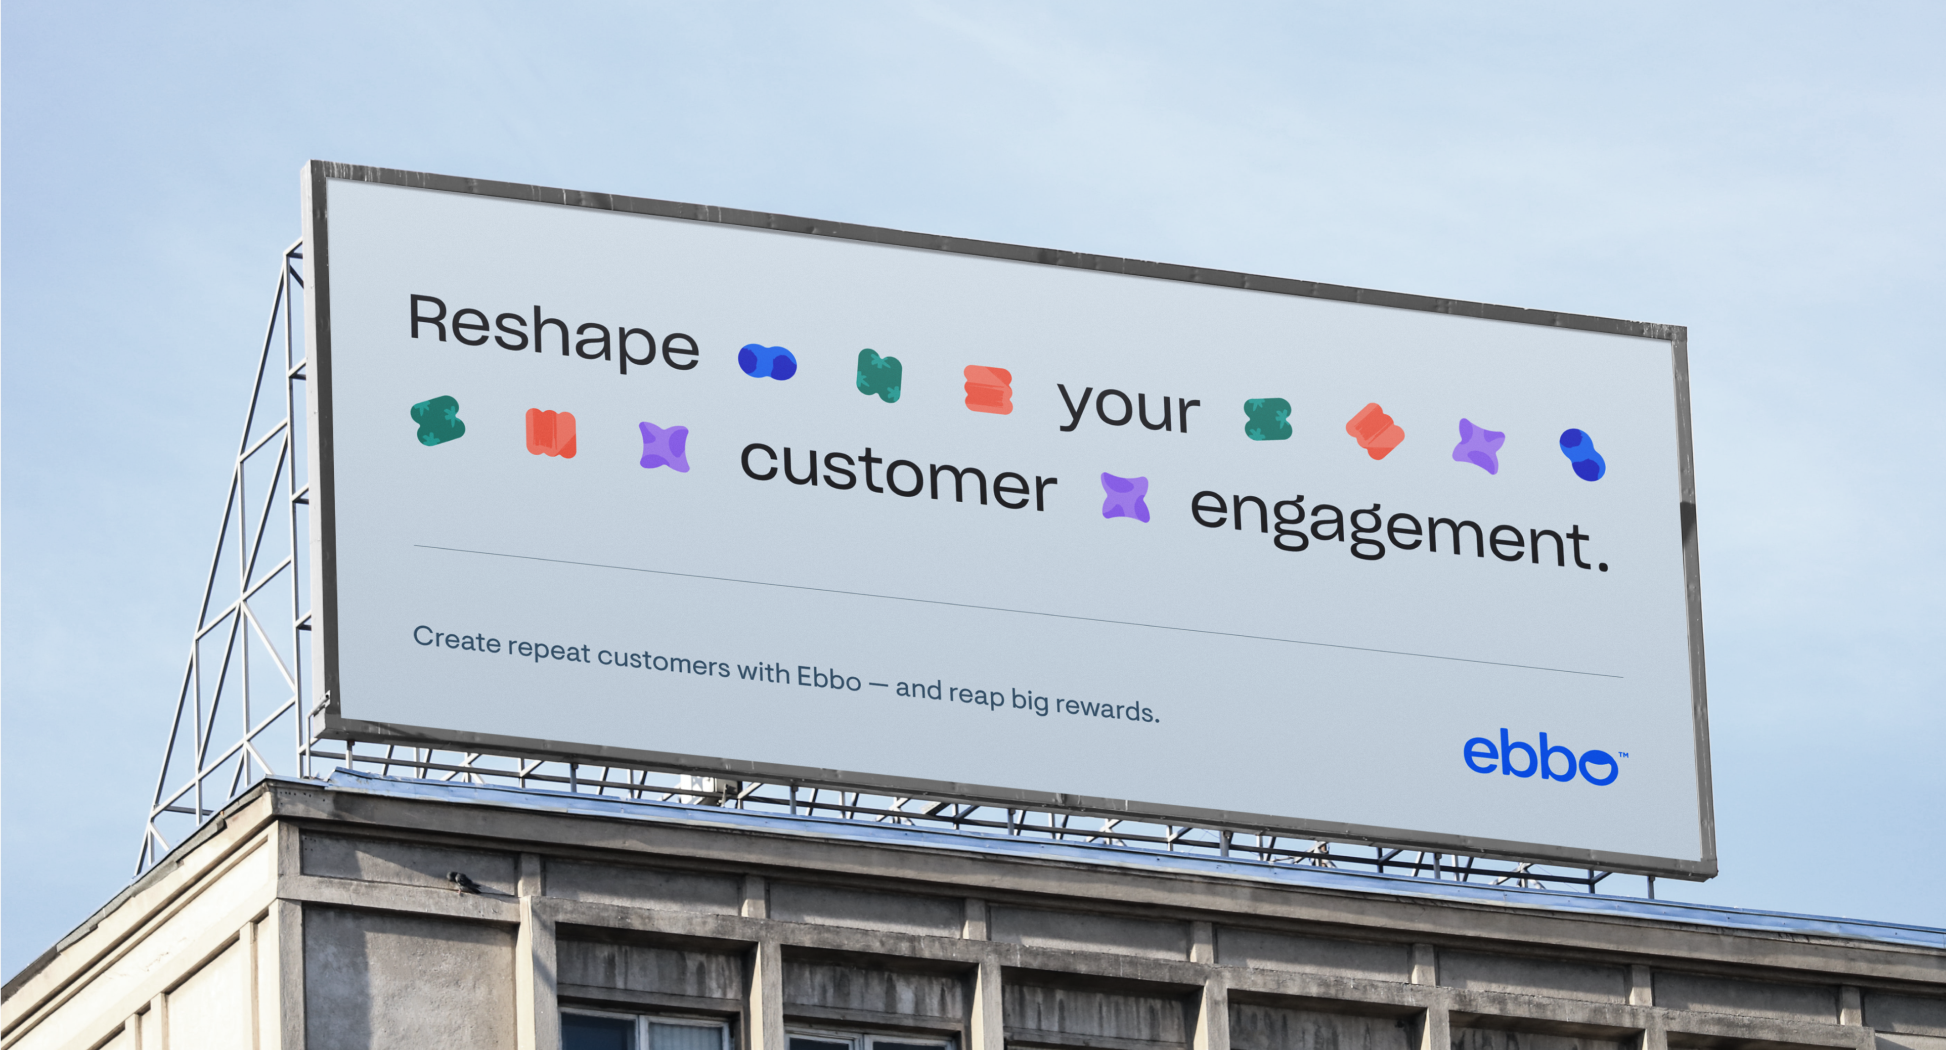 Ebo billboard - reshape your B2B customer engagement with creative marketing services.